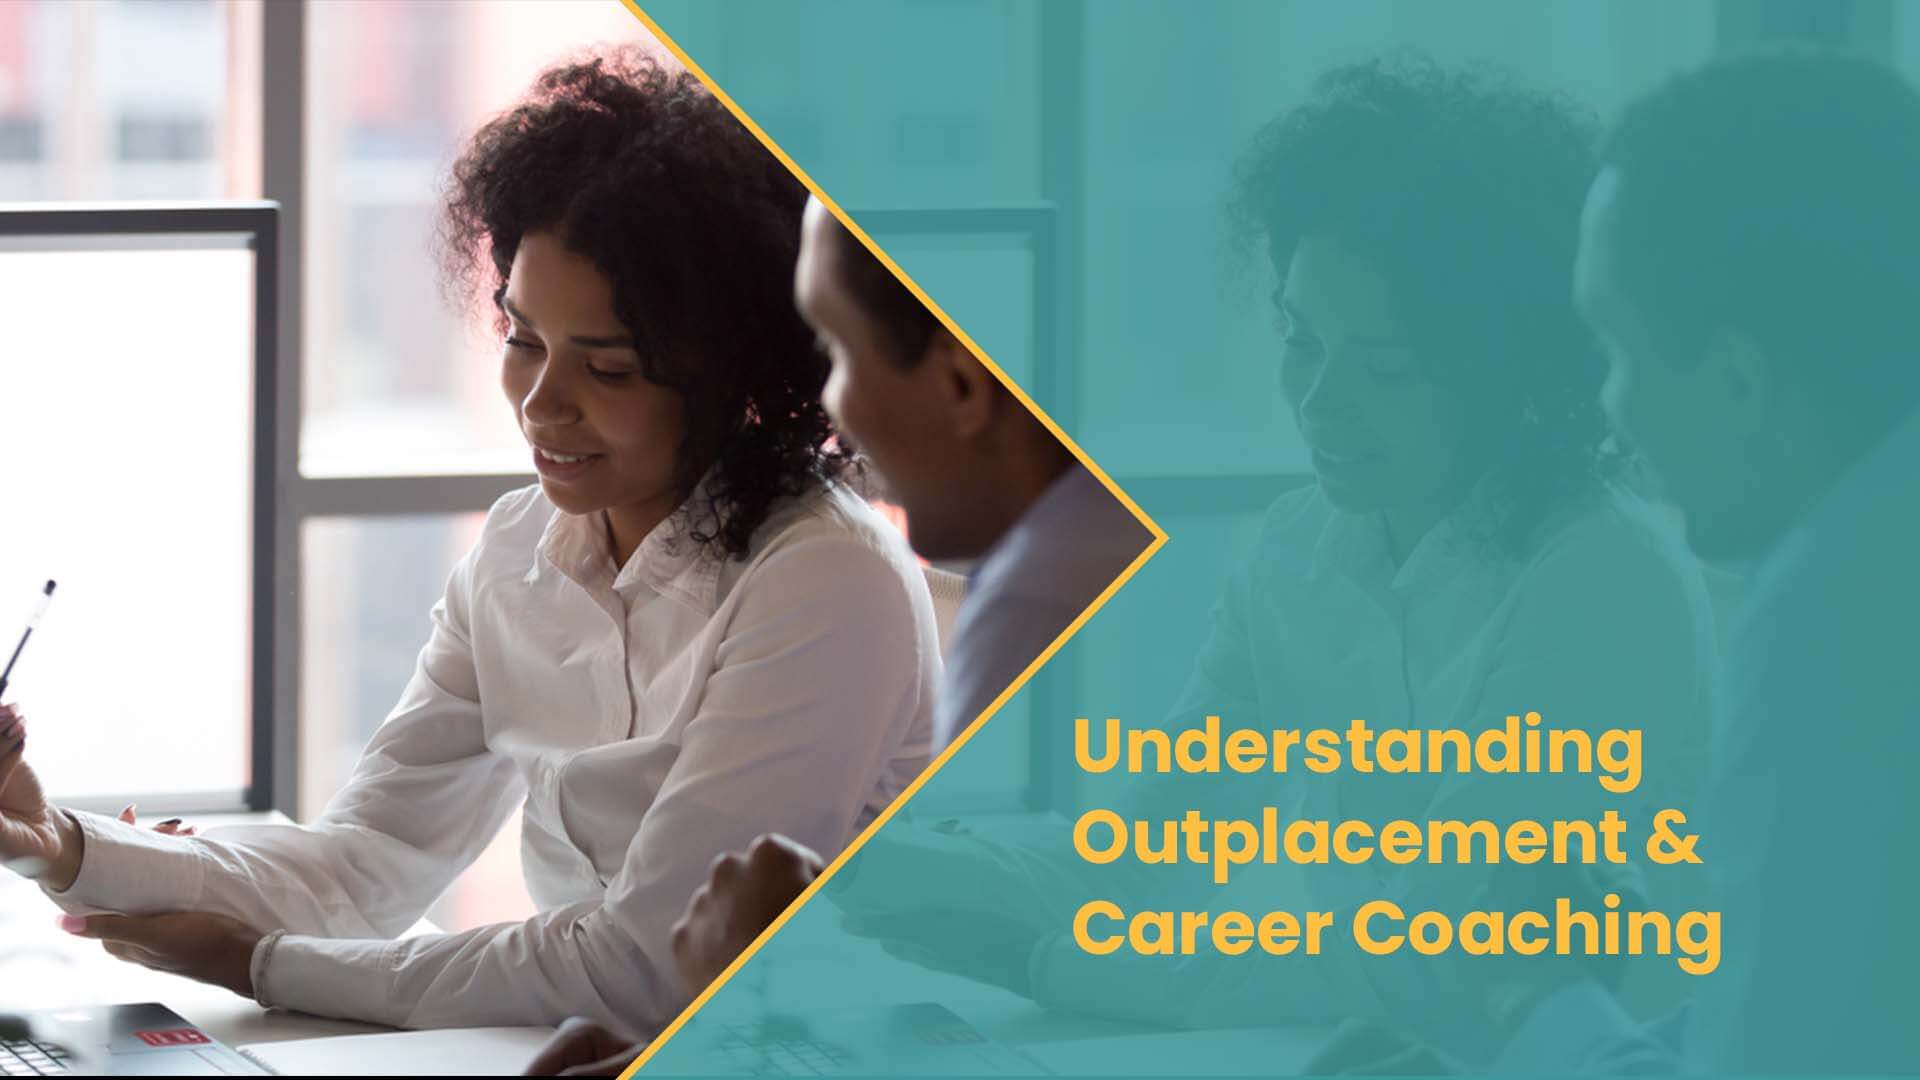 two people discussing in an attempt to understand outplacement and career coaching